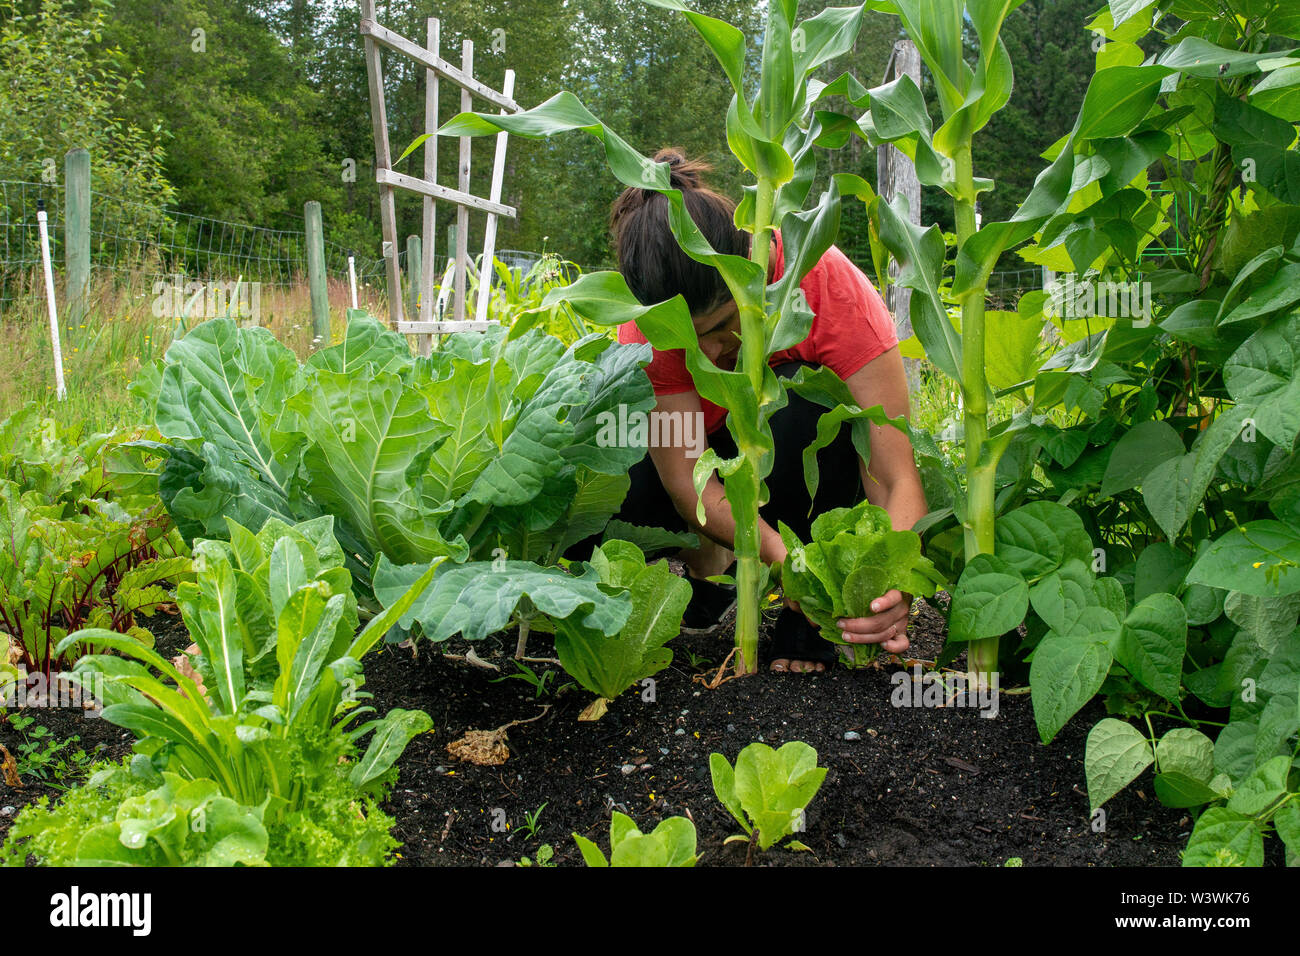 Mid length view of a women cutting a head of lettuce in her backyard vegetable garden. Stock Photo